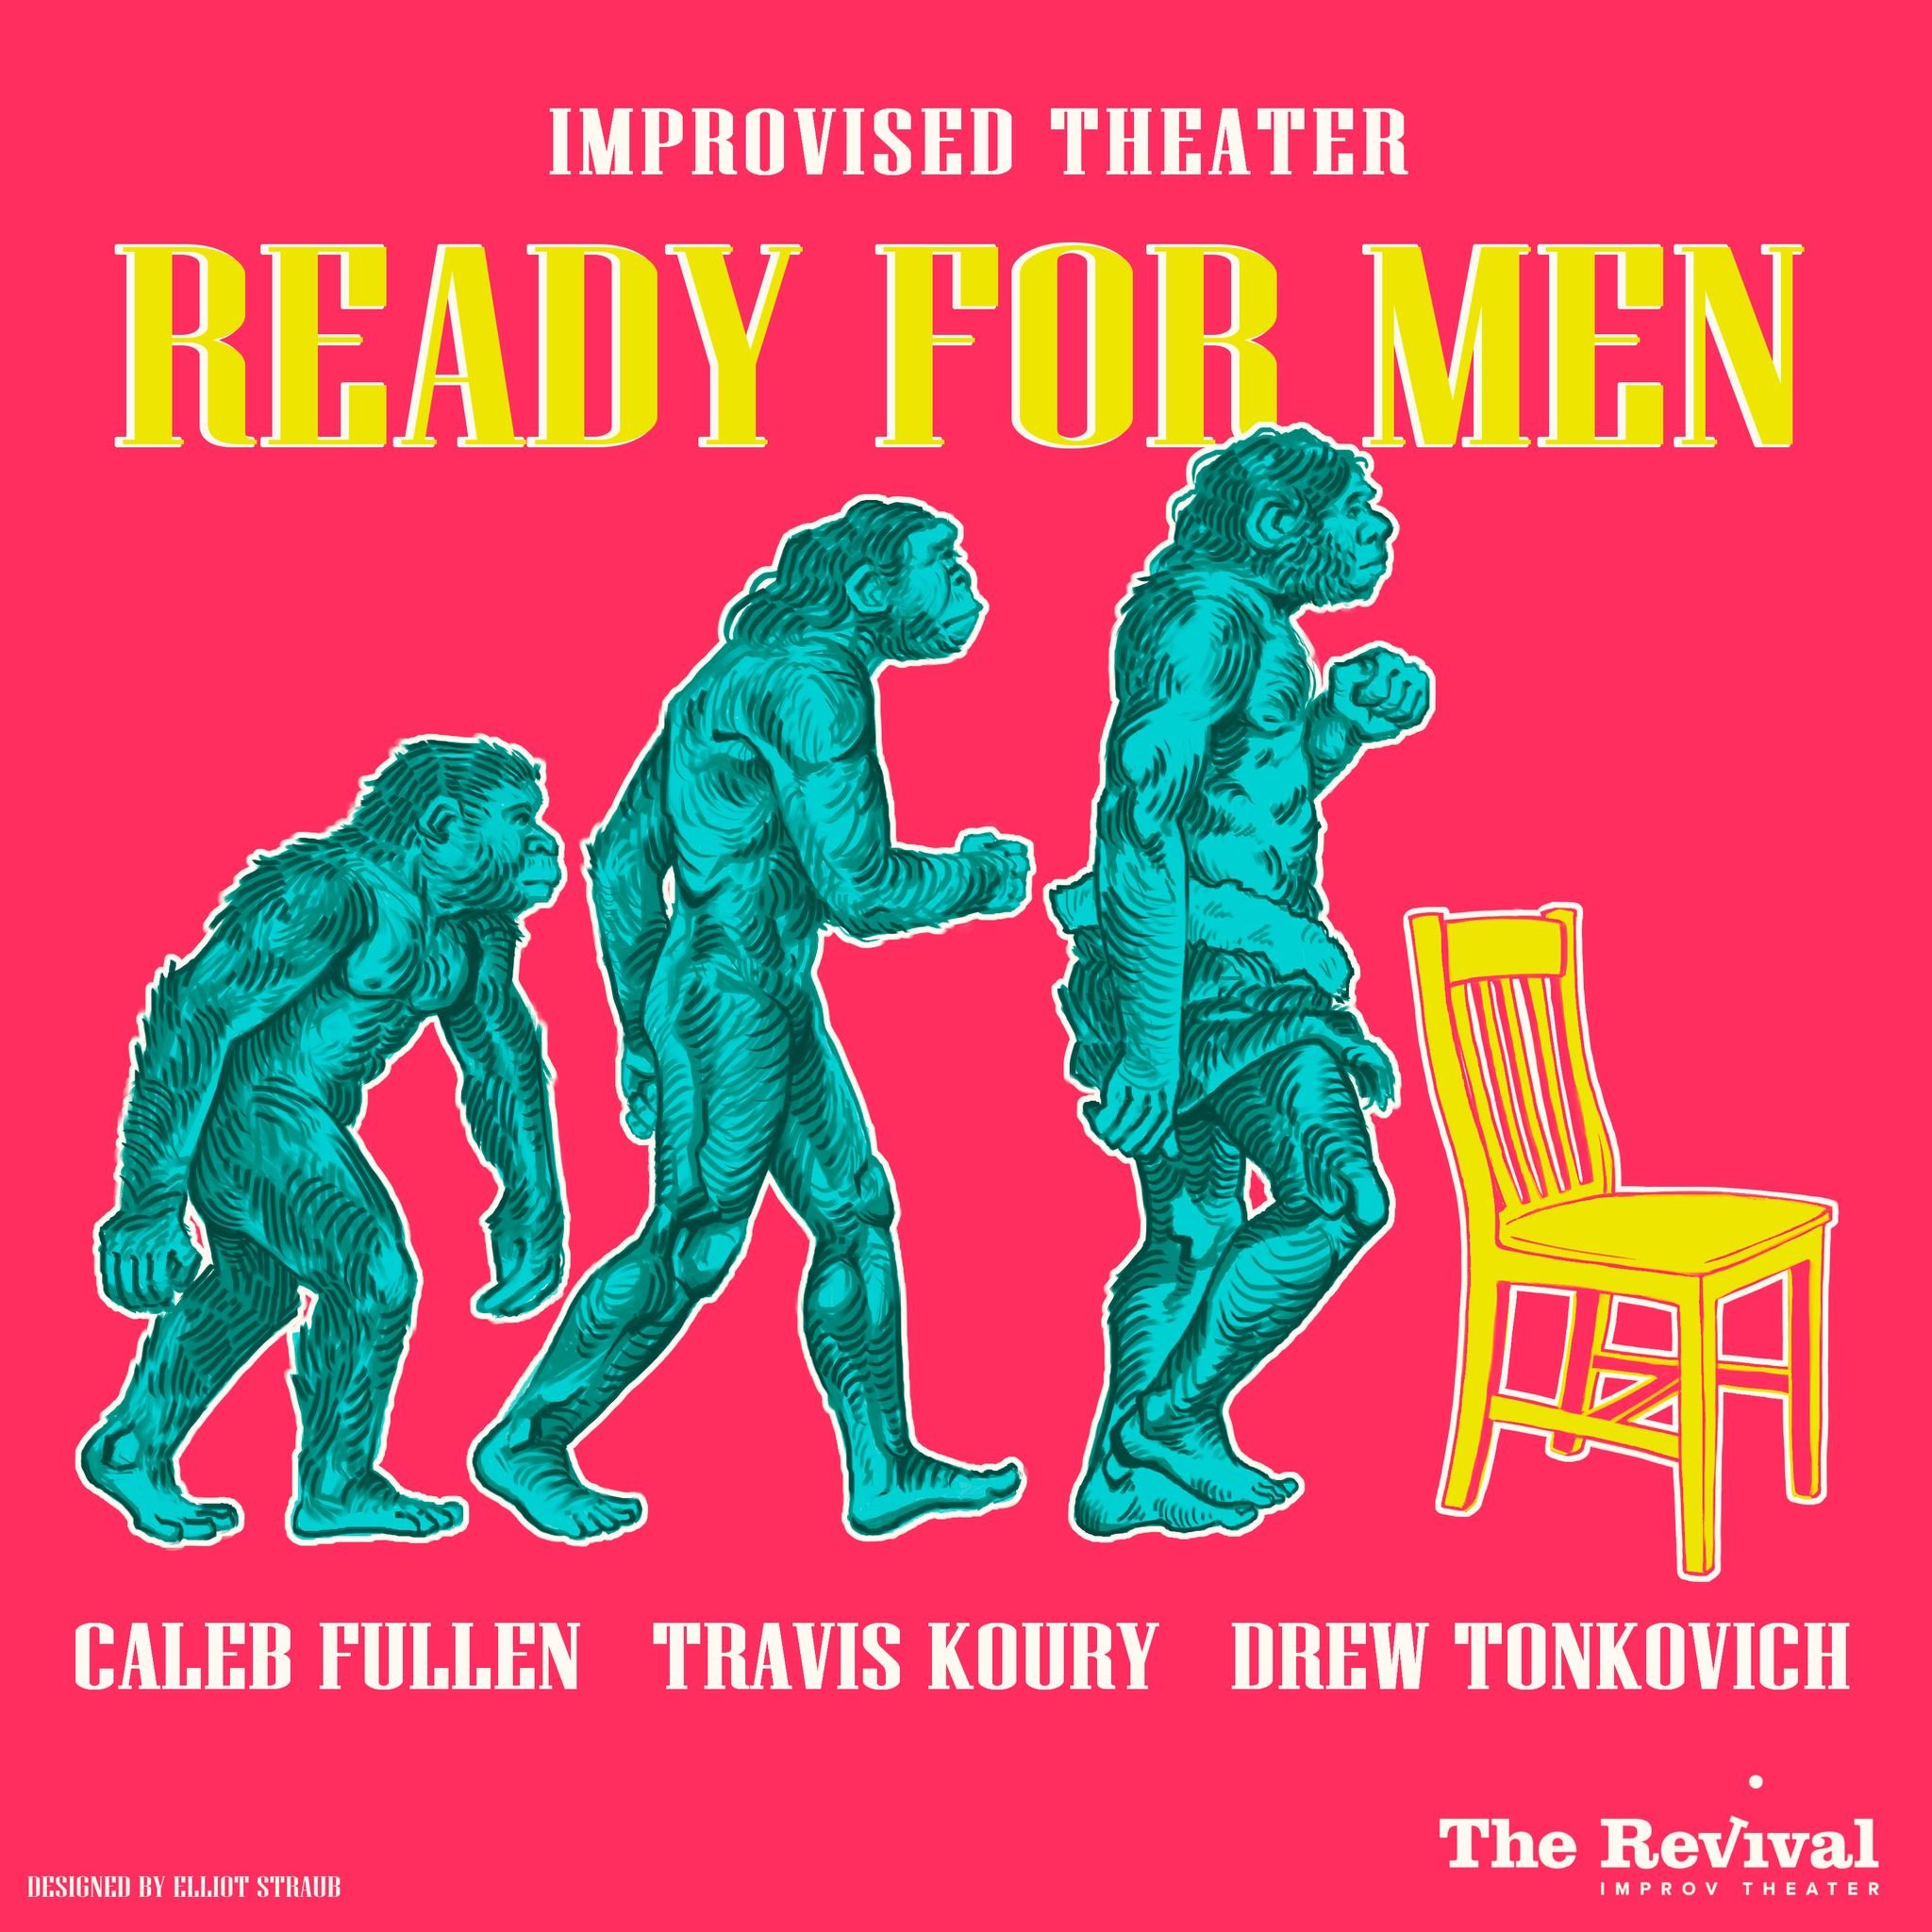 Join us on Saturdays at 9:00 pm (5/11, 5/18, 5/25, 6/1, 6/8, 6/15) for Ready for Men, a fully improvised play featuring veteran performers Caleb Fullen, Travis Koury, and Drew Tonkovich. Inspired by audience suggestions, the ensemble creates each cha